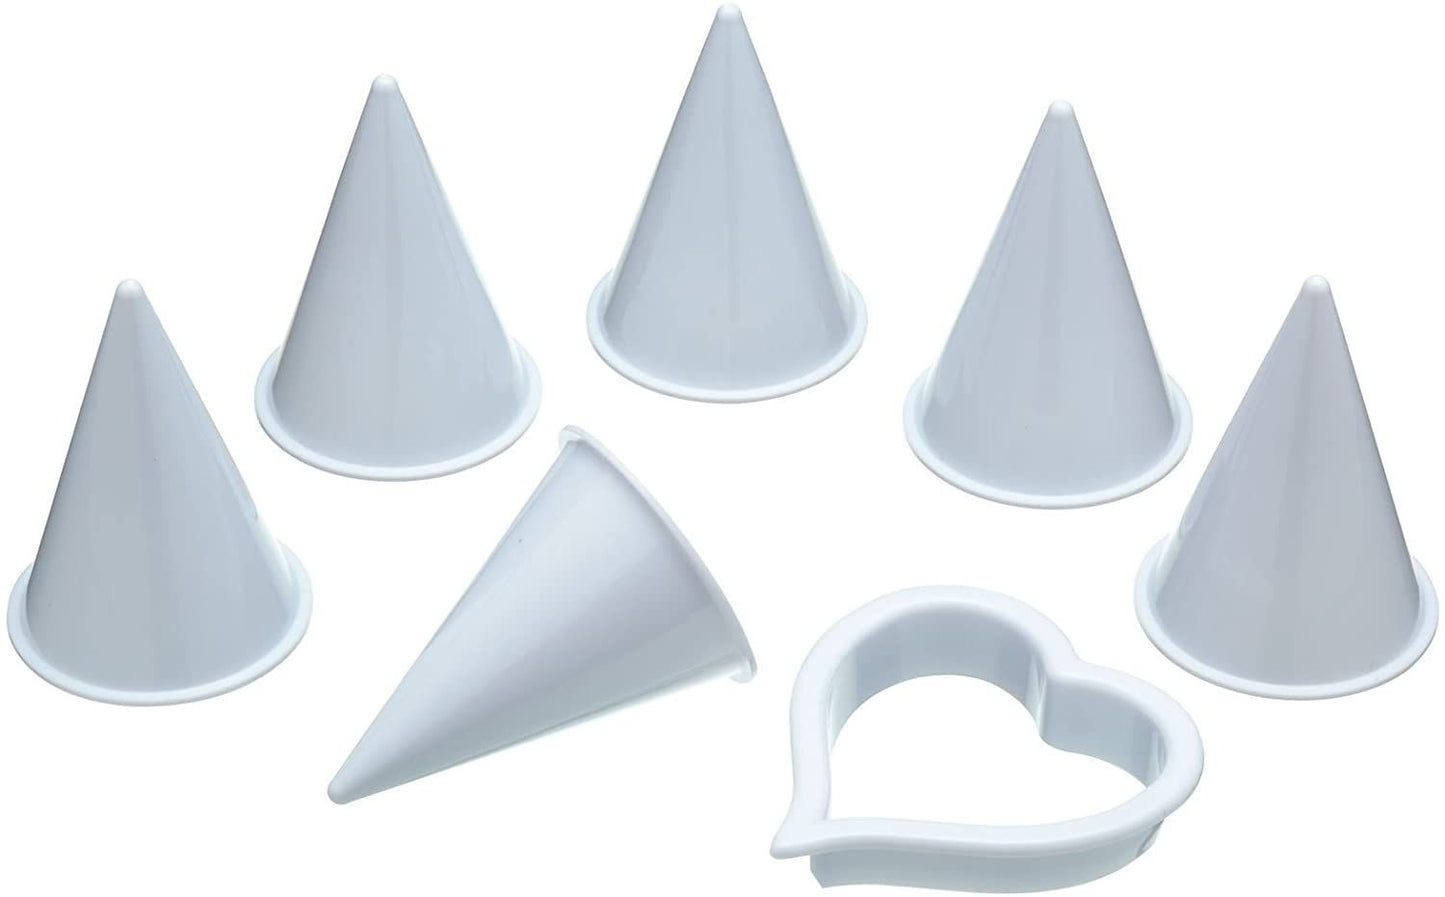 KitchenCraft Sweetly Does It Calla Lily Fondant Moulds, Set of 6 SDIFCCALA7PC